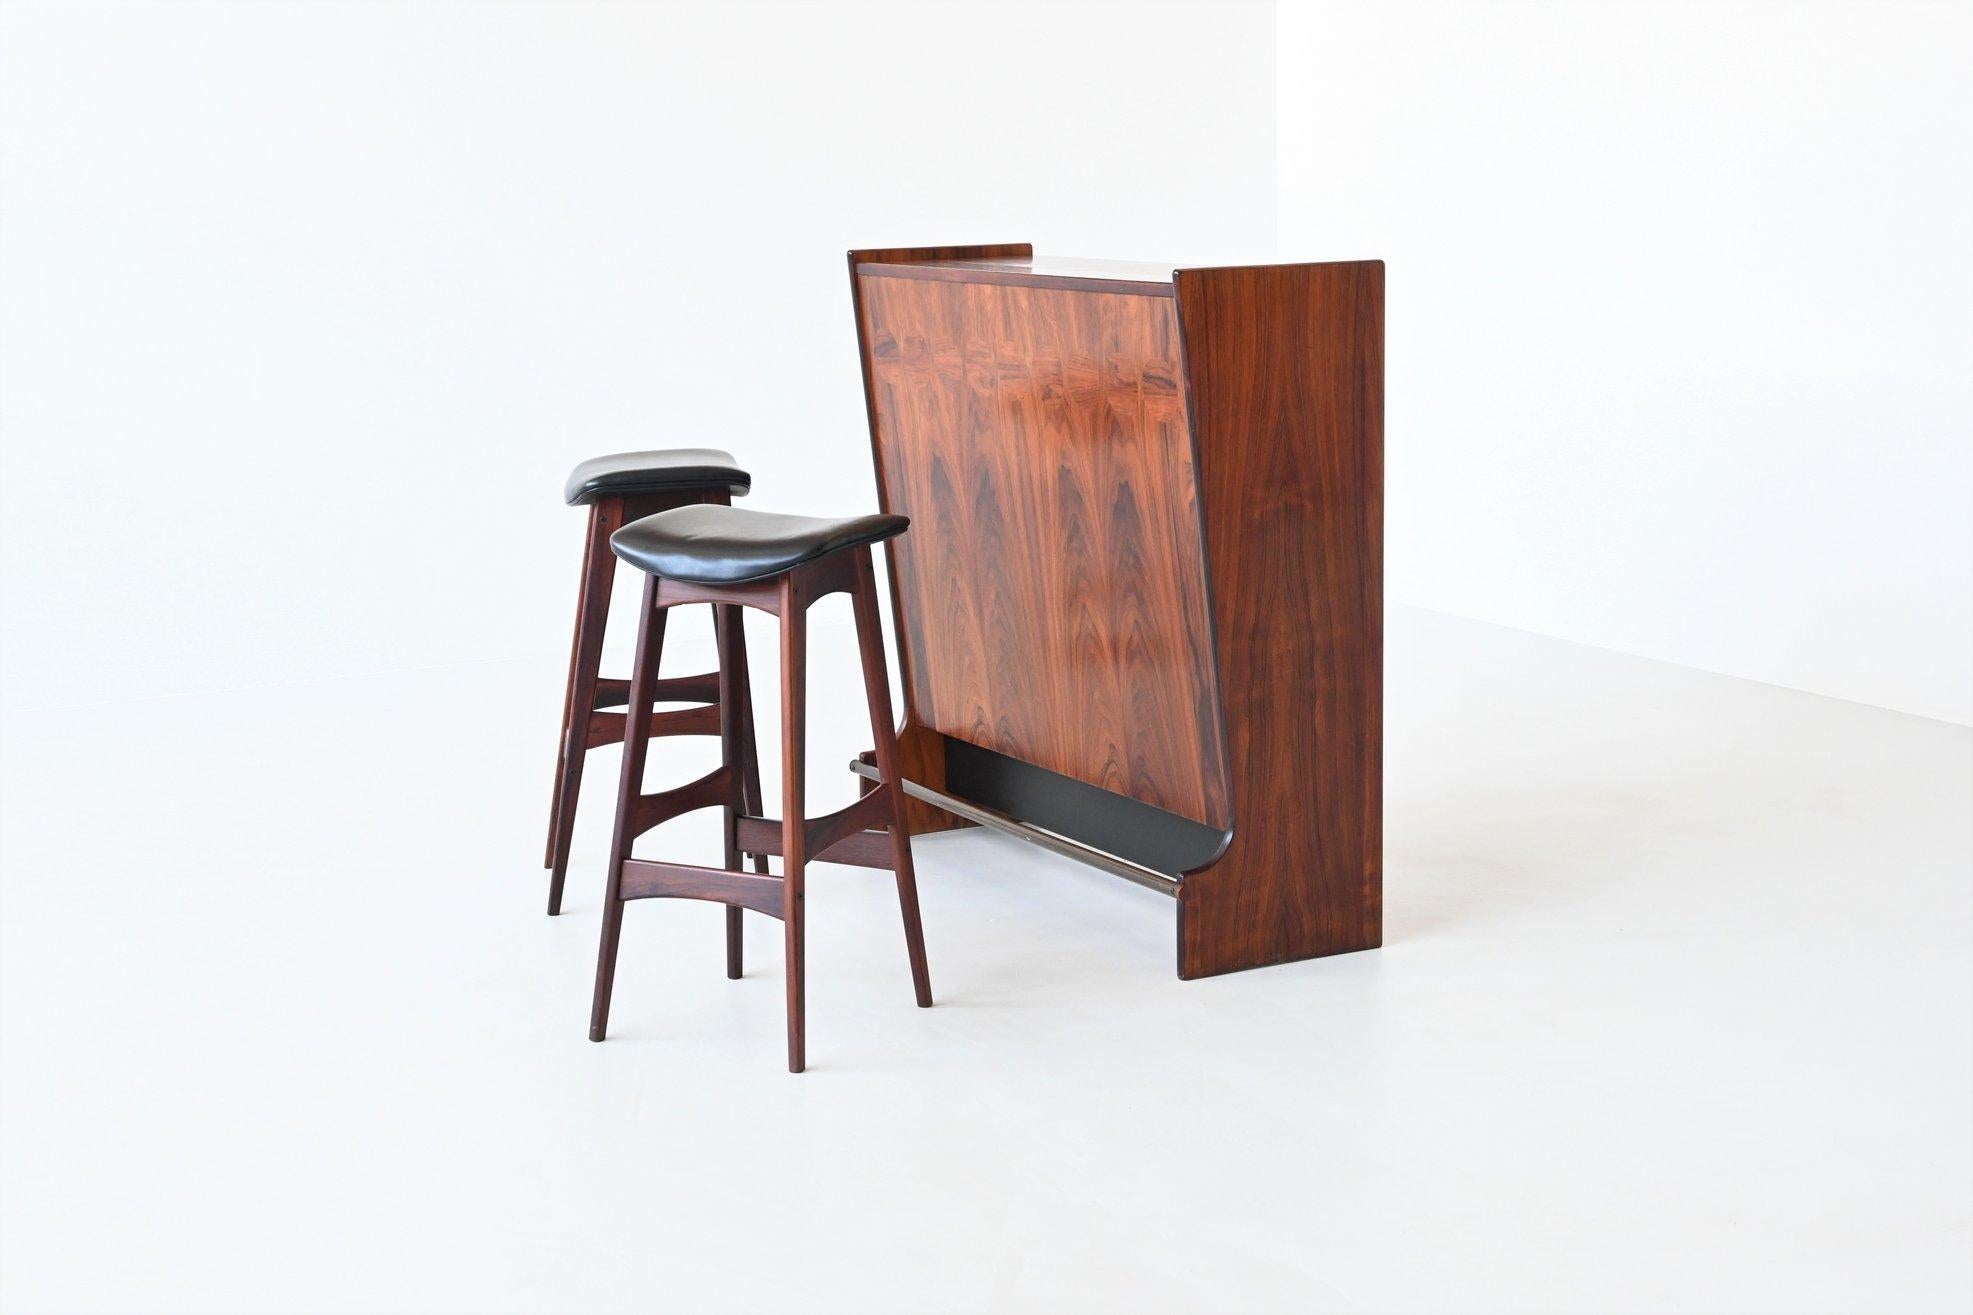 Highly refined freestanding dry bar cabinet with two corresponding bar stools designed by Johannes Andersen for Skaaning & Søn, Denmark 1960.

This decorative yet functional model SK661 liquor bar is executed in rosewood. One side of it features